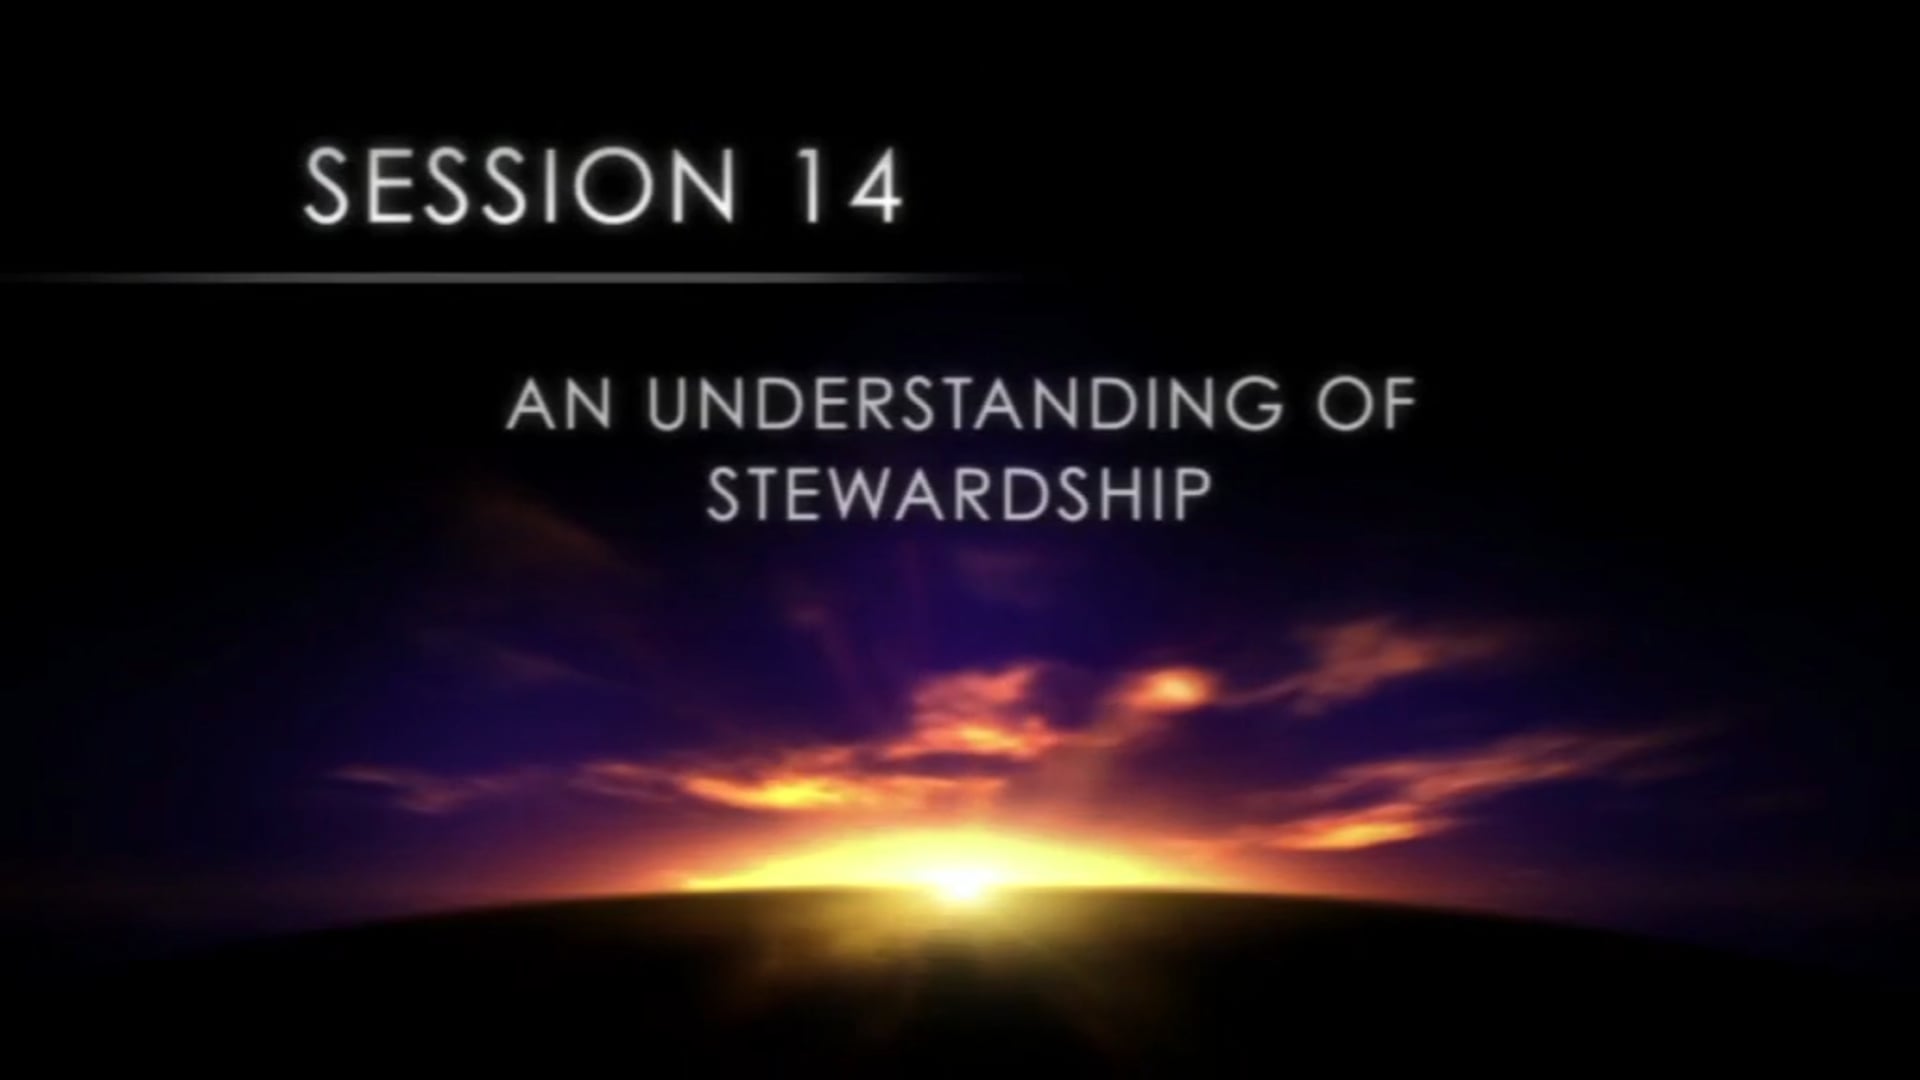 The Discipleship Journey - Session 14 - An understanding of stewardship